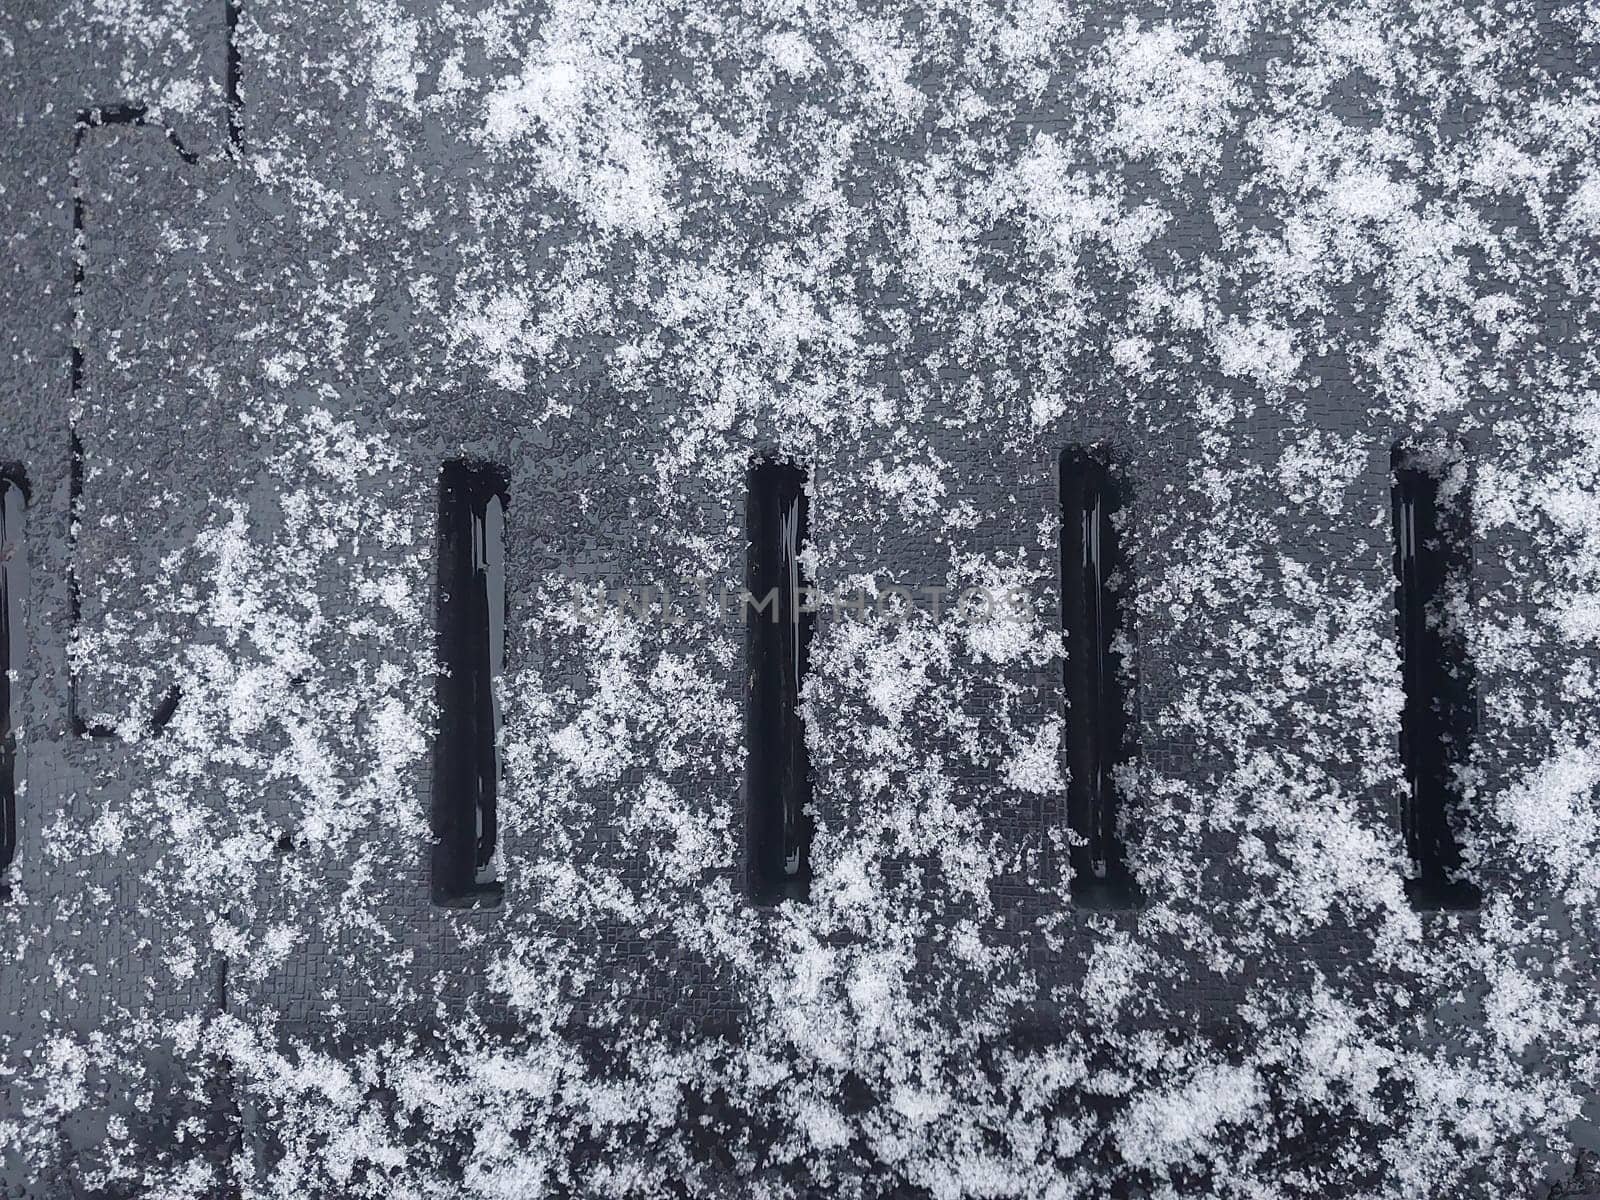 Texture of fallen snow on the objects